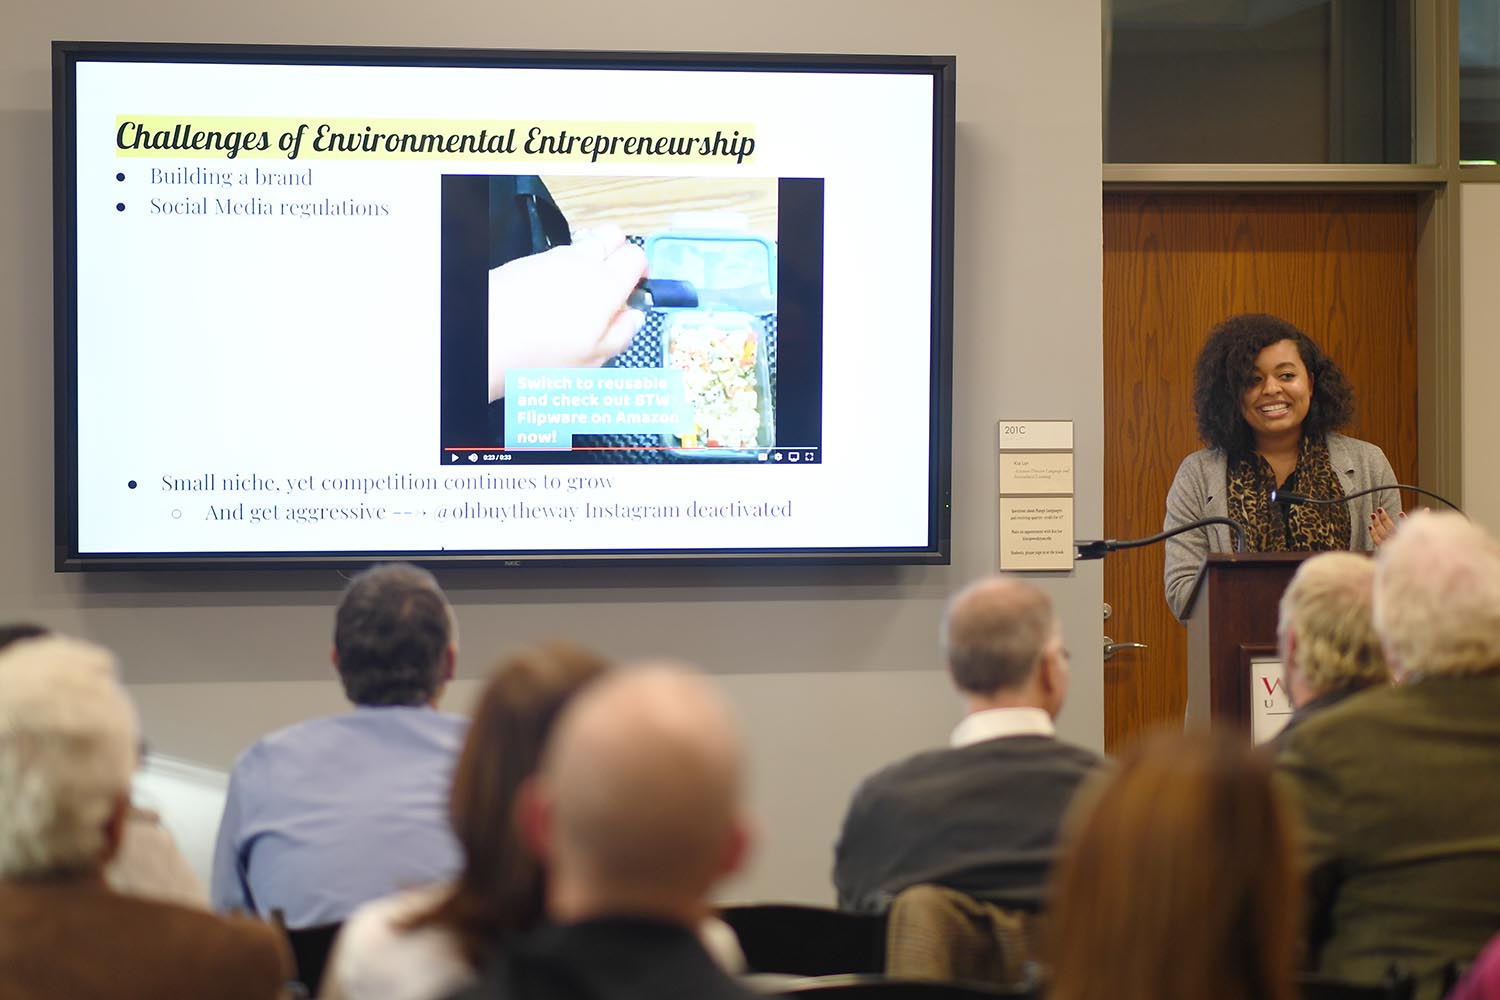 Keynote speakers included Danielle Pruitt ’15, founder of Oh, Buy the Way, a socially conscious e-commerce company of environmental products;